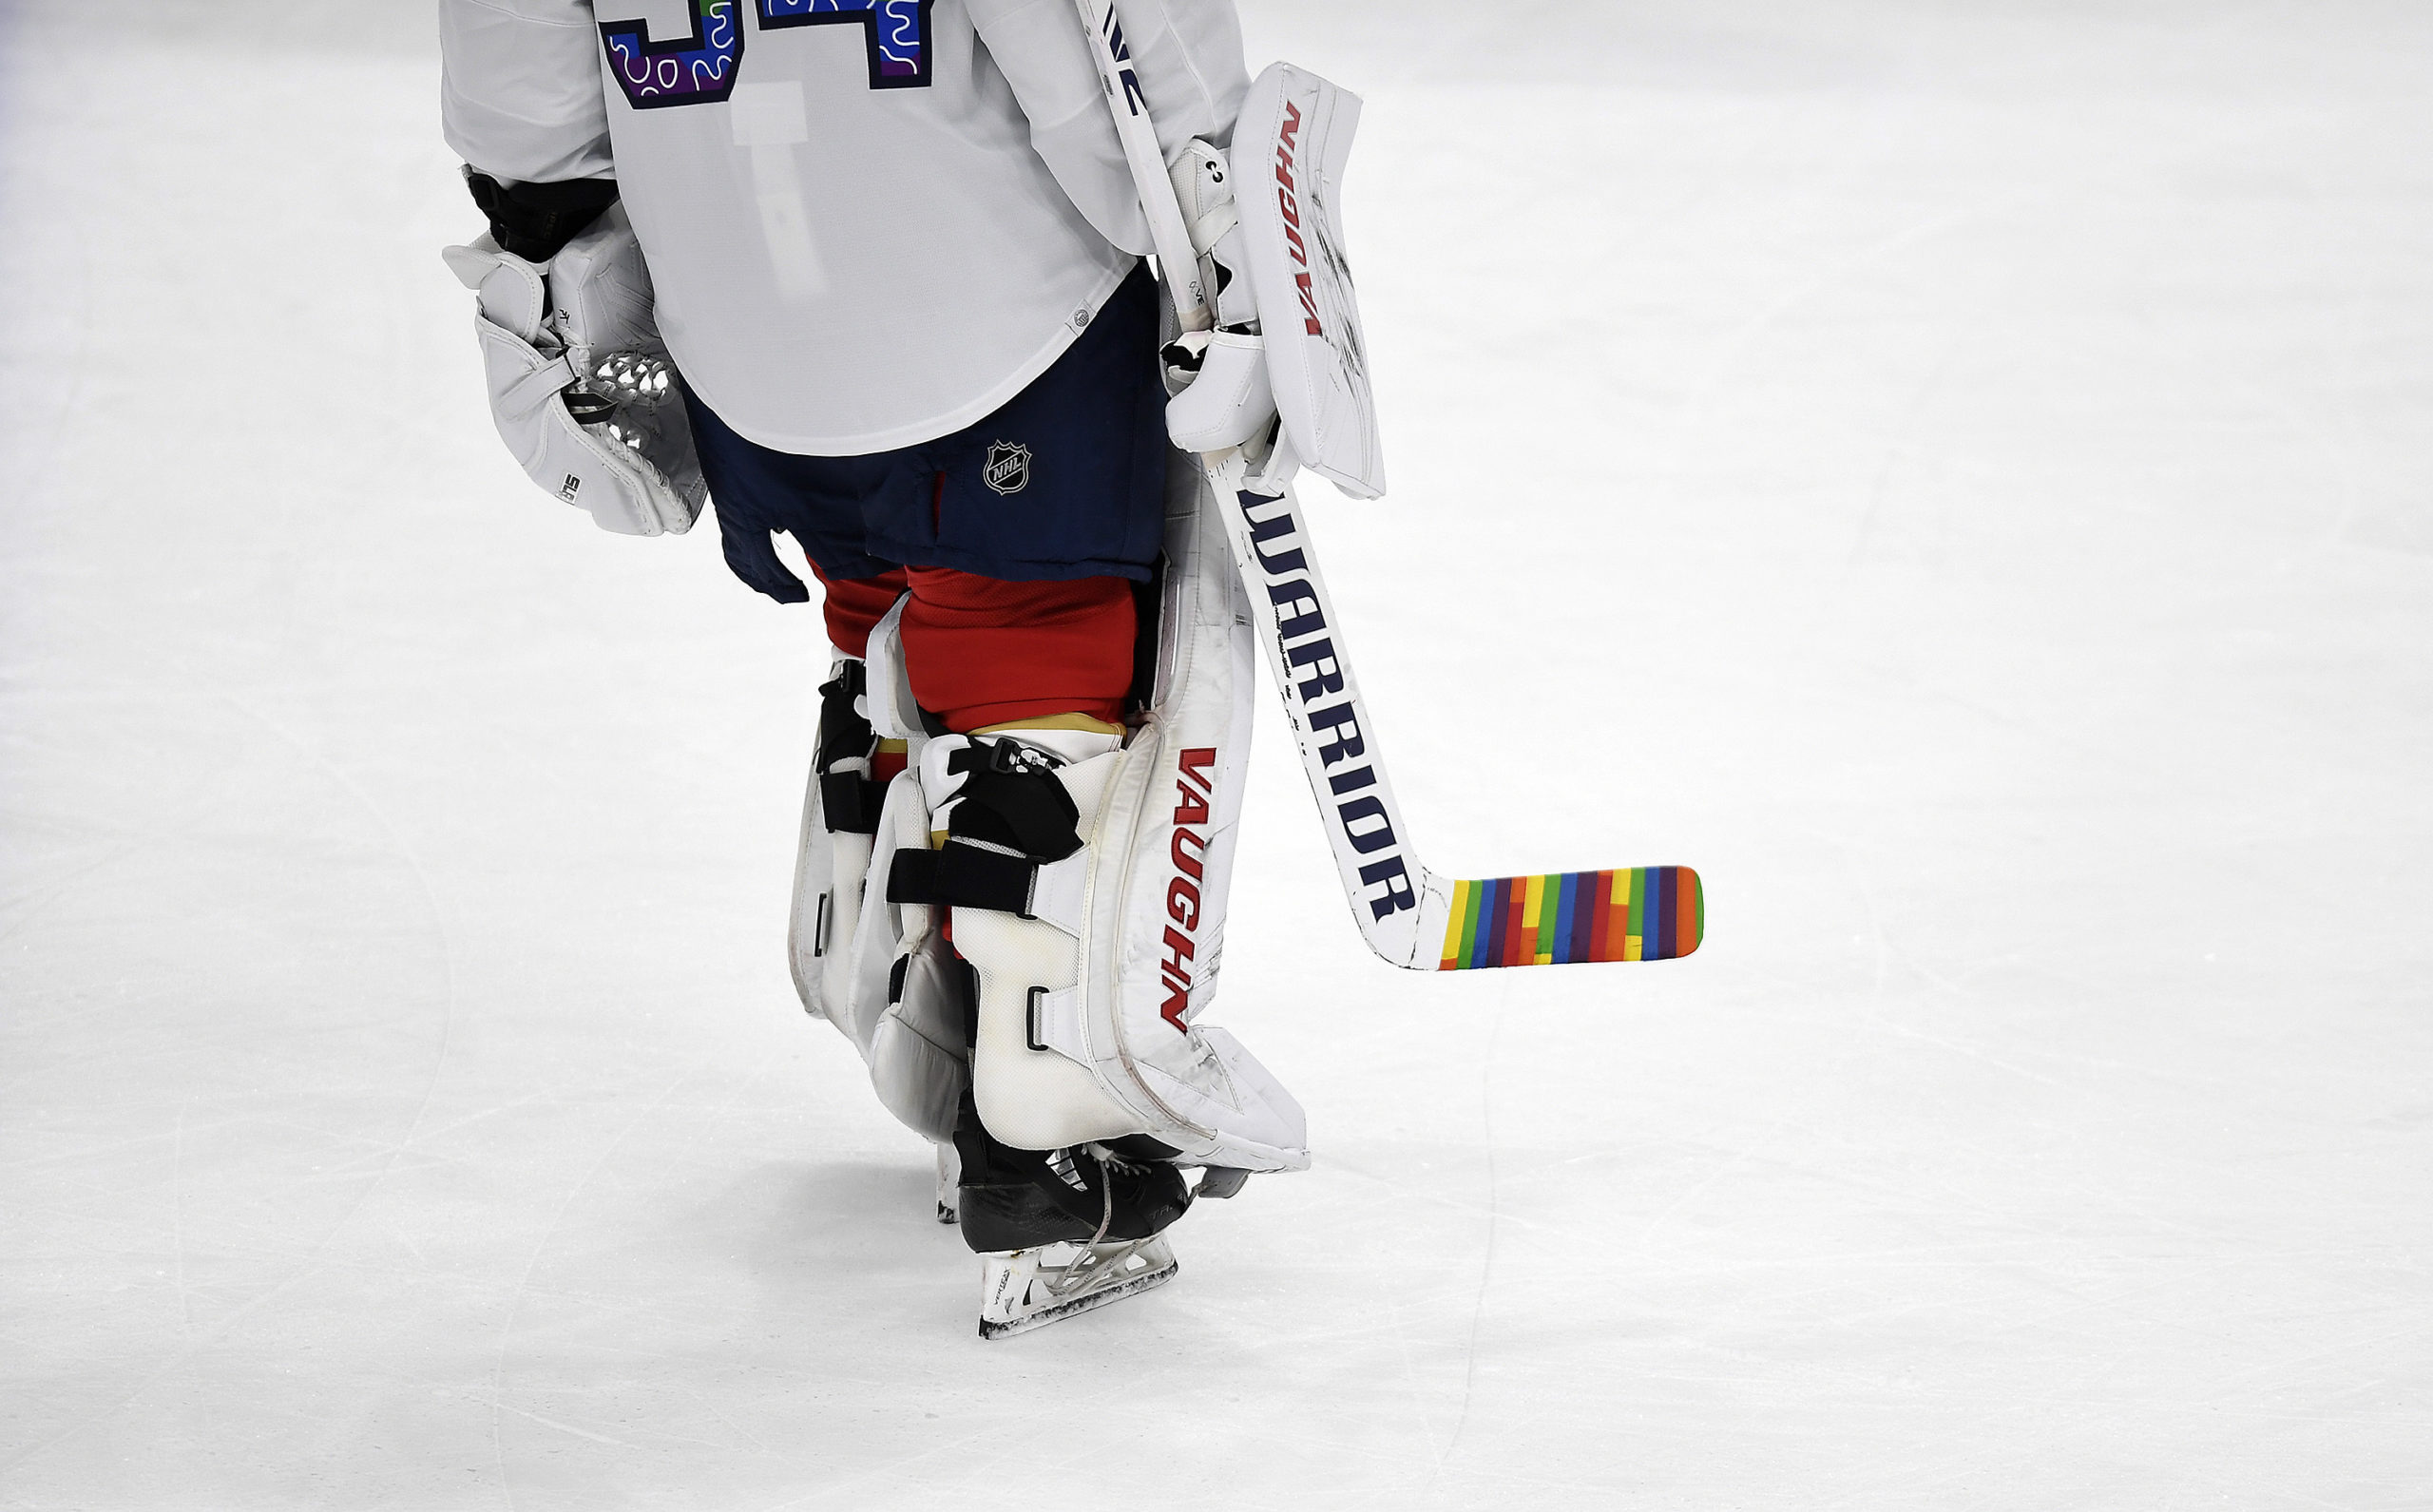 Florida Panthers goaltender Alex Lyon warms up with a colorful hockey stick during "pride" night before playing the Toronto Maple Leafs in Sunrise, Florida, on March 23. Last week the NHL sent memos to teams informing them of protocols for themed celebrations for the upcoming season, including the banning of "pride" tape during "pride" nights.